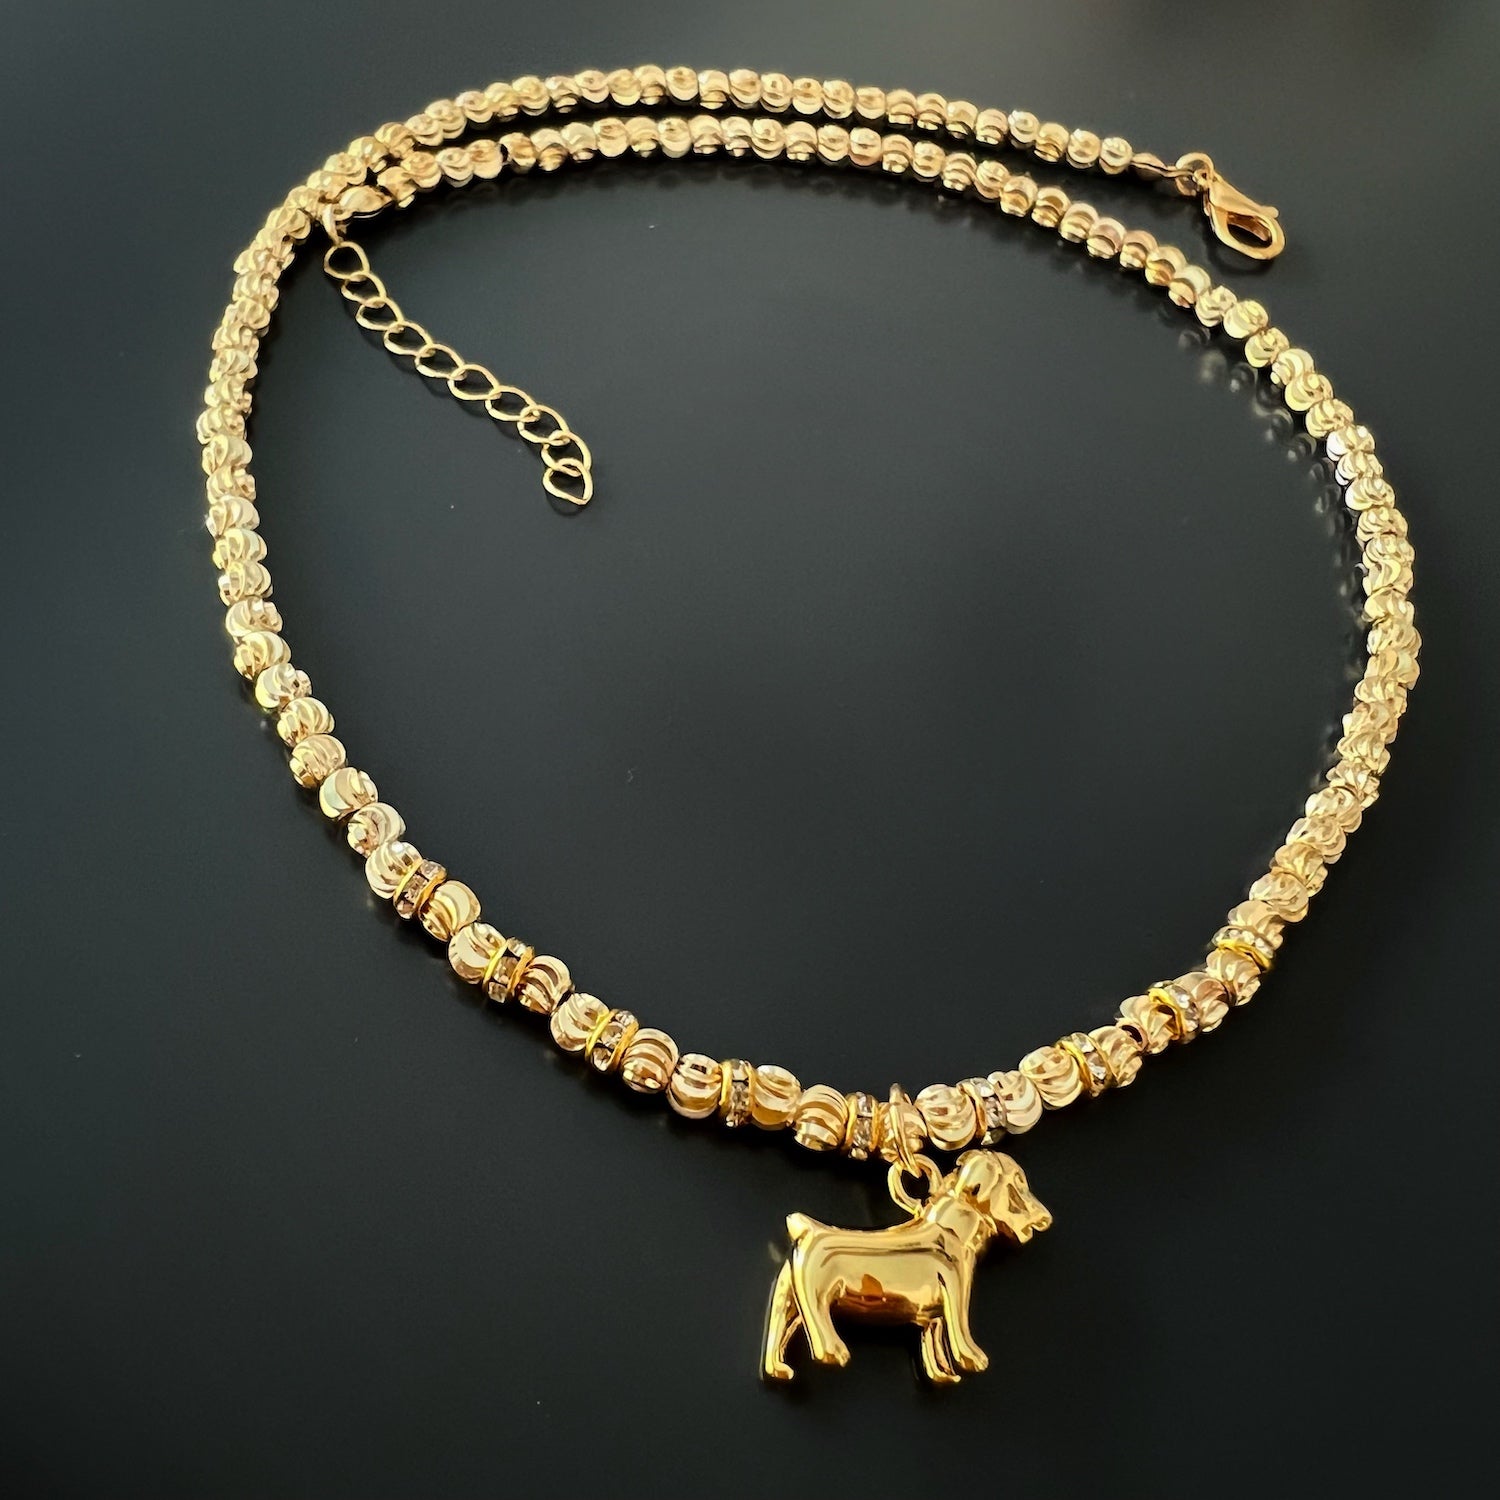  A detailed shot of the clasp and extender chain of the Happy Dog Gold Necklace, showcasing the craftsmanship and attention to detail in the construction of the necklace.